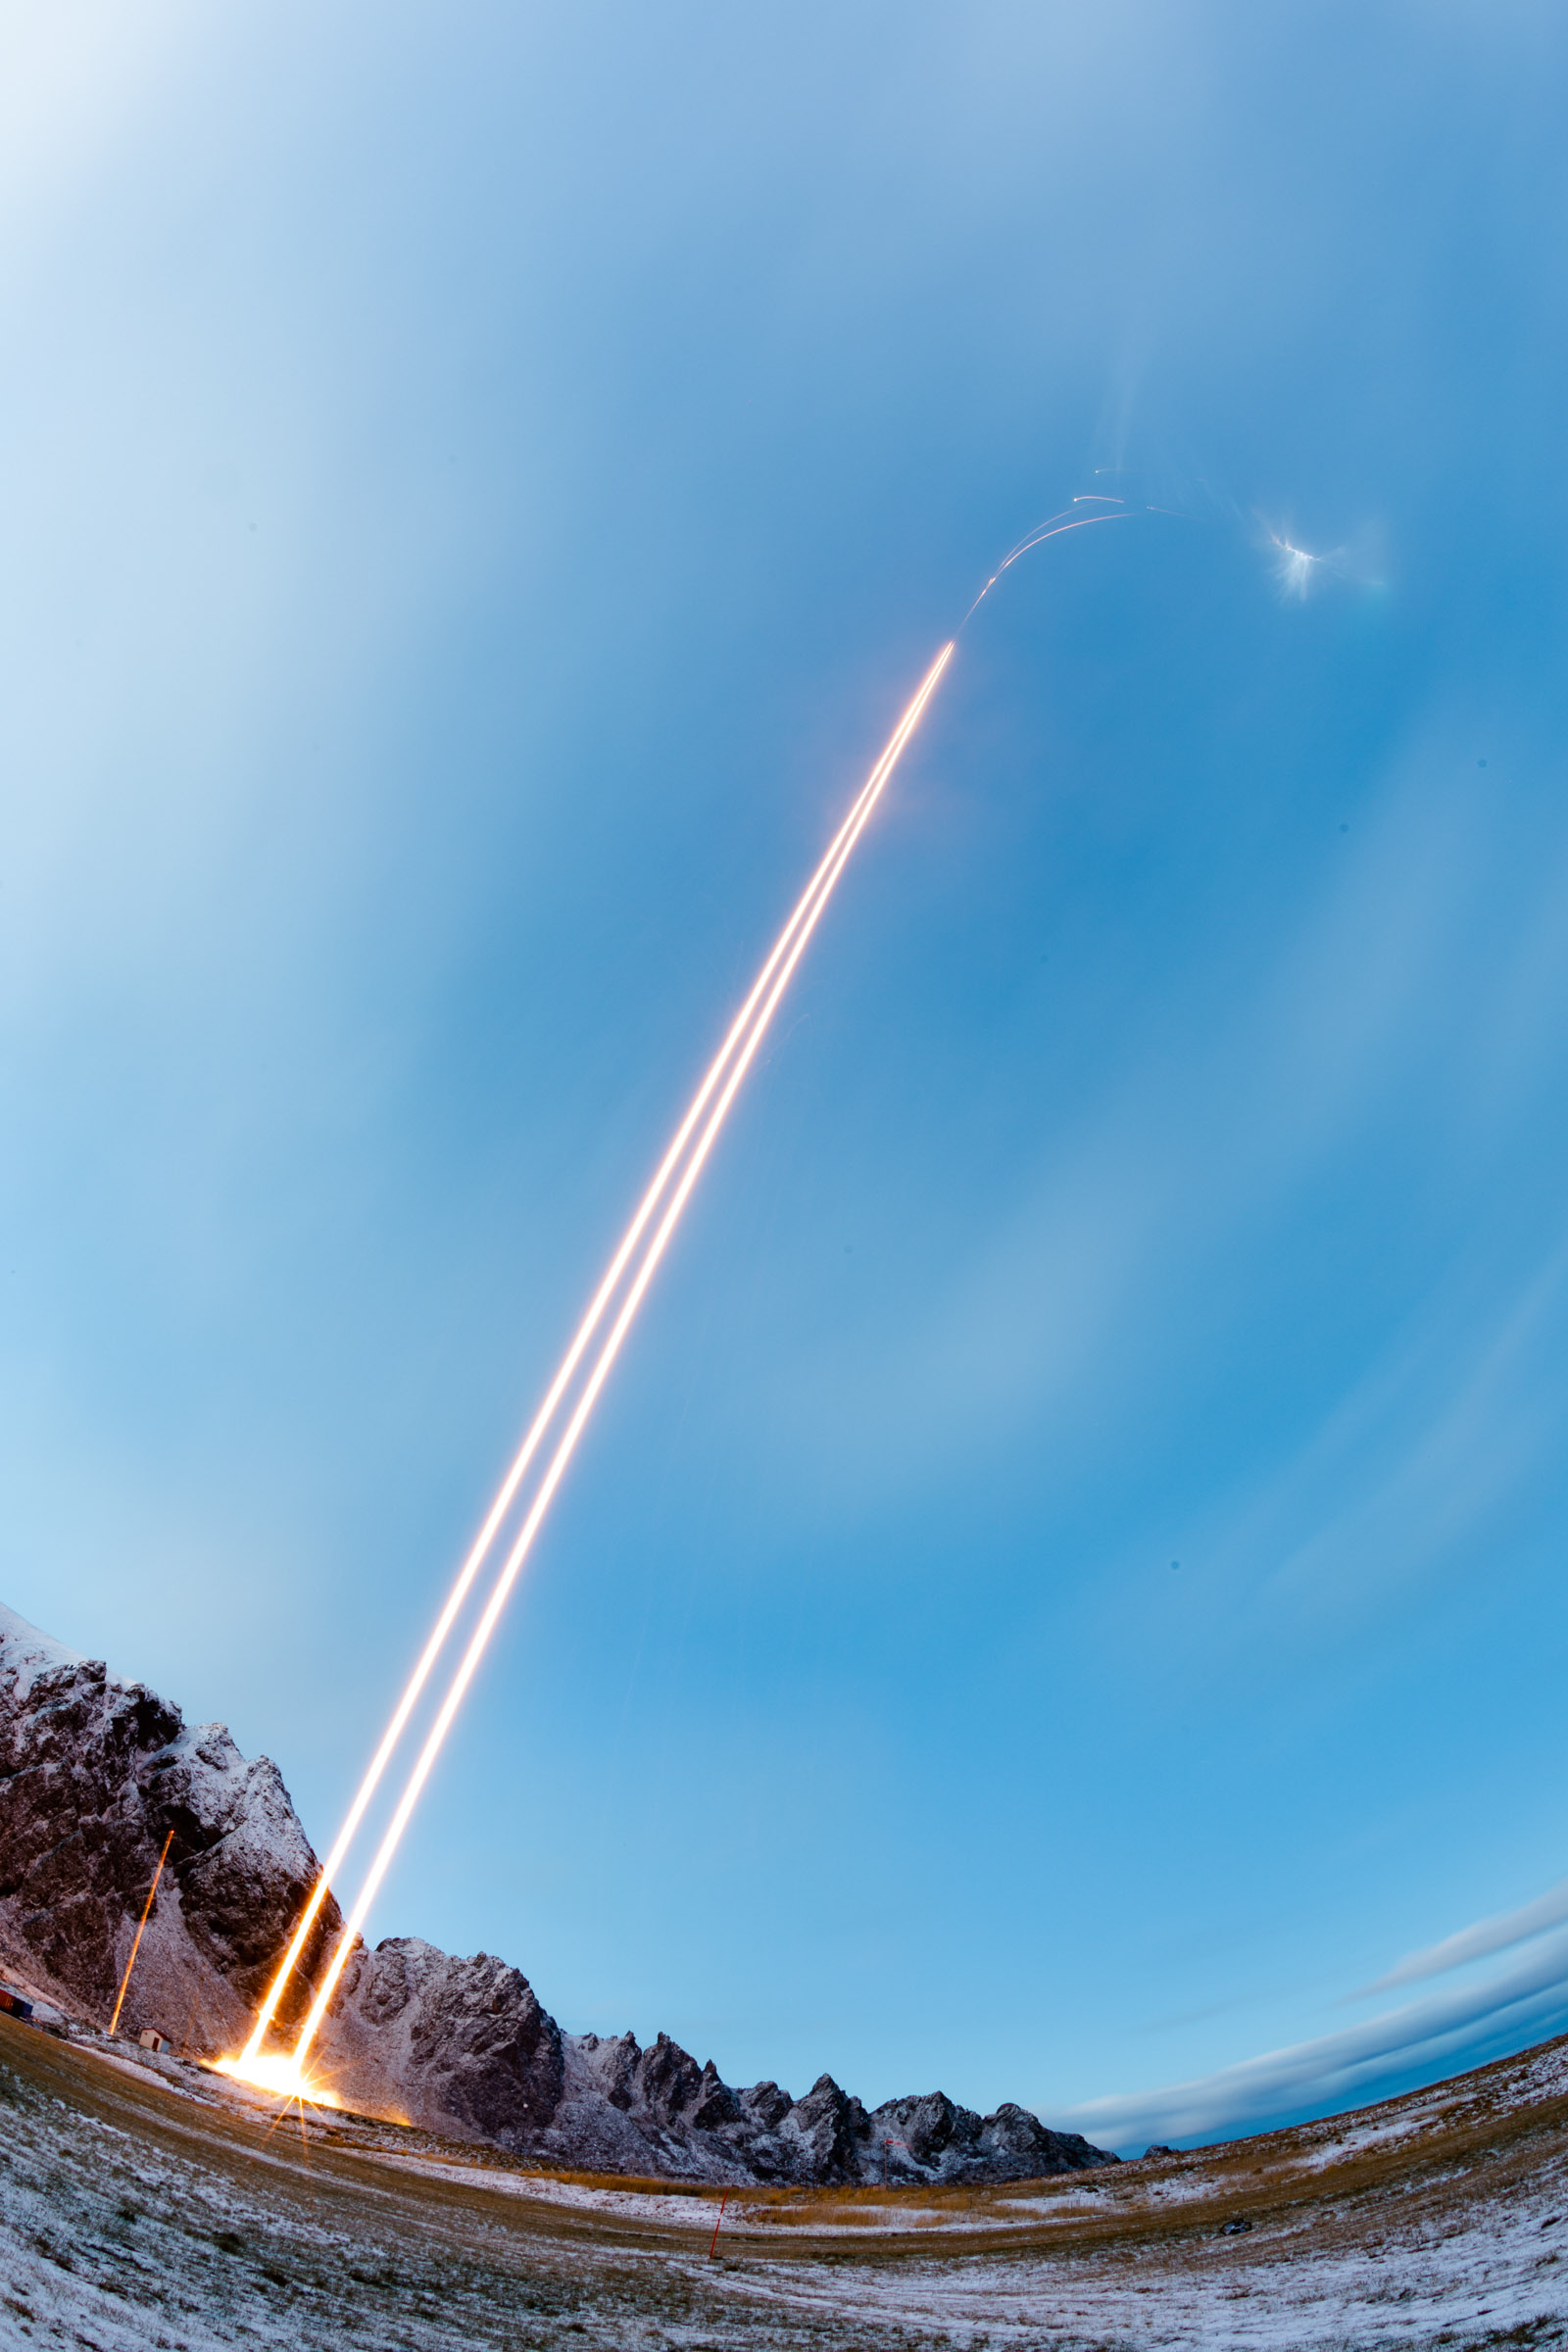 A time-lapse photo shows a rocket launching into the sky, leaving a bright, arcing trail against a backdrop of mountains and a clear blue sky. Snow-covered ground and scattered clouds are visible, with the horizon stretching below.